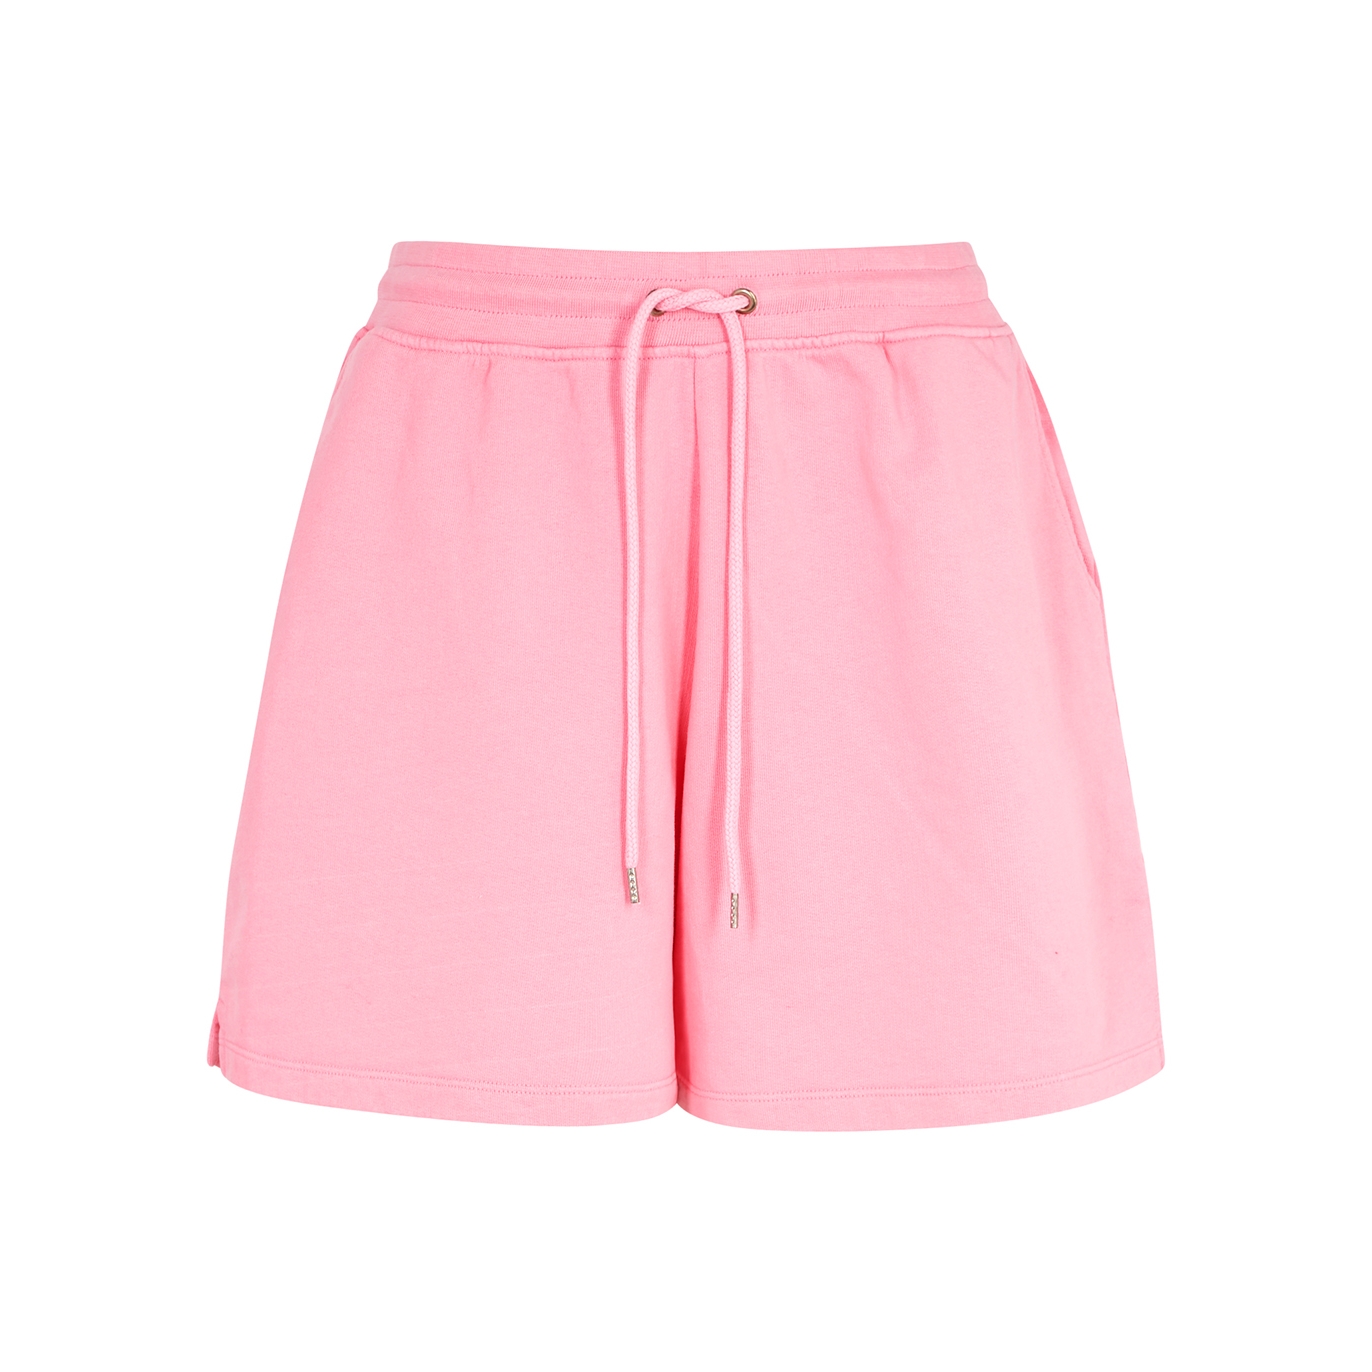 Colorful Standard Light Pink Cotton Shorts